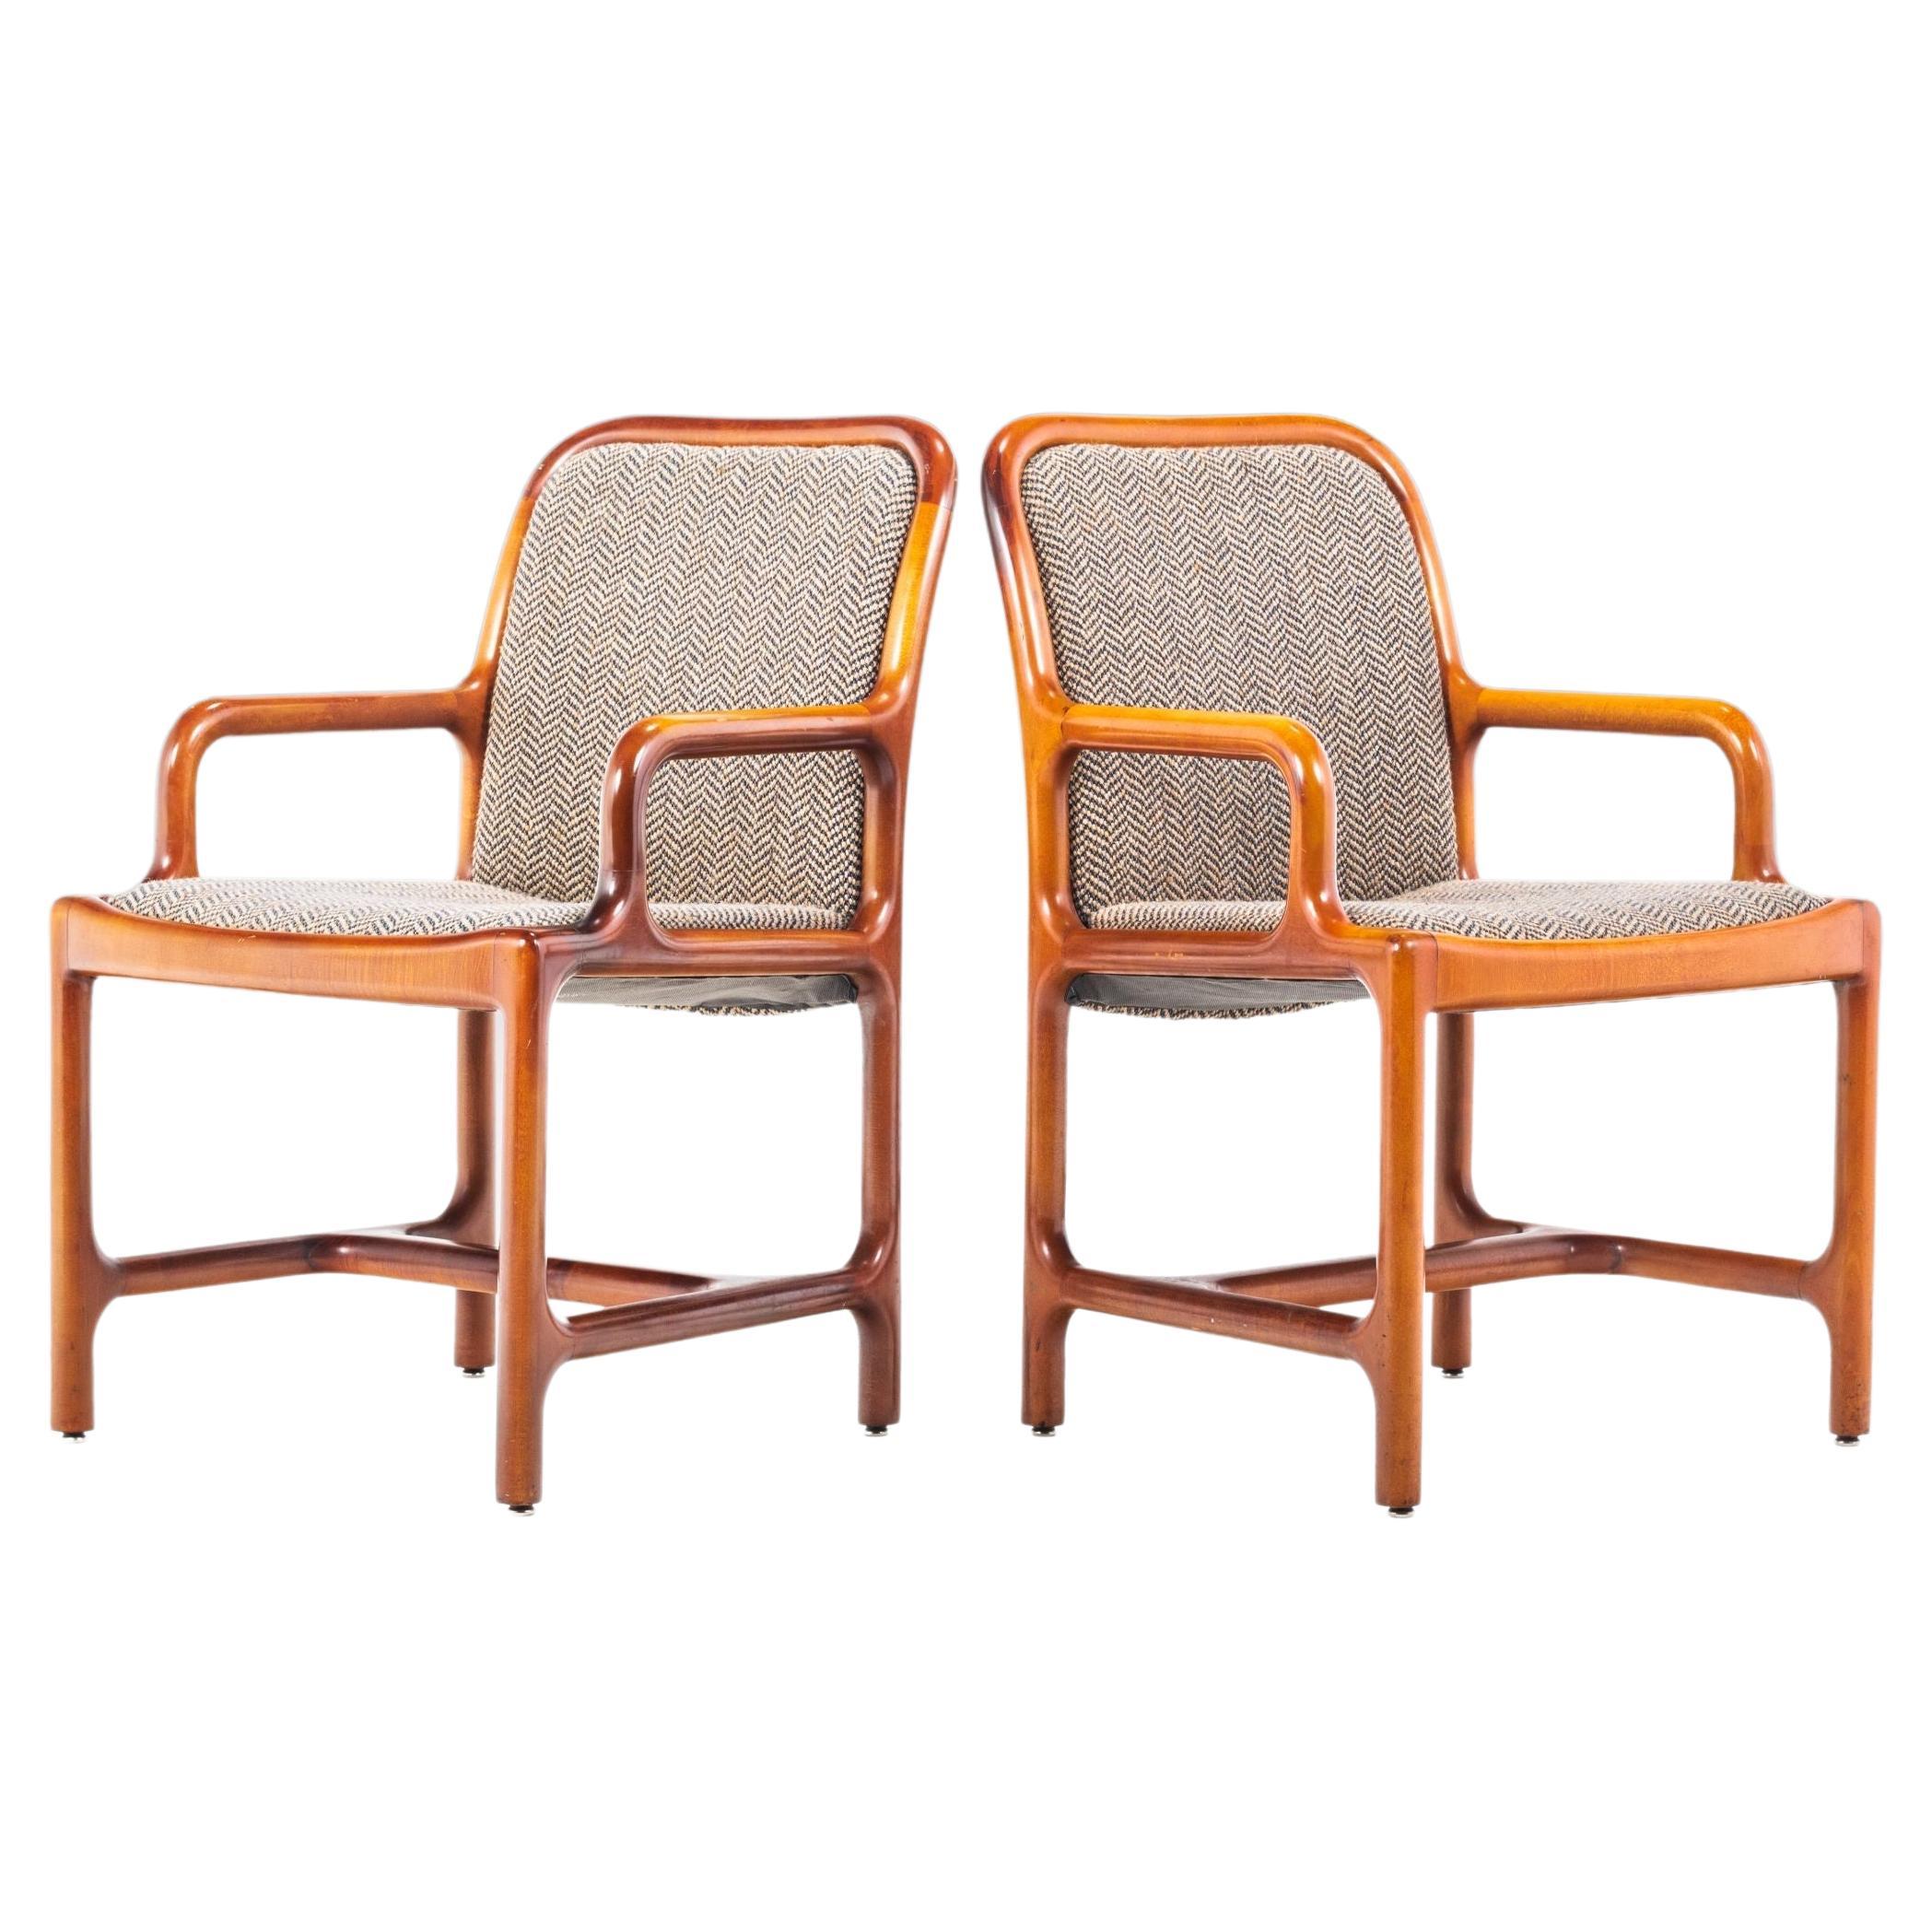 Set of Two '2' Mid-Century Modern Pretzel Chairs in Oak and Original Tweed, USA For Sale